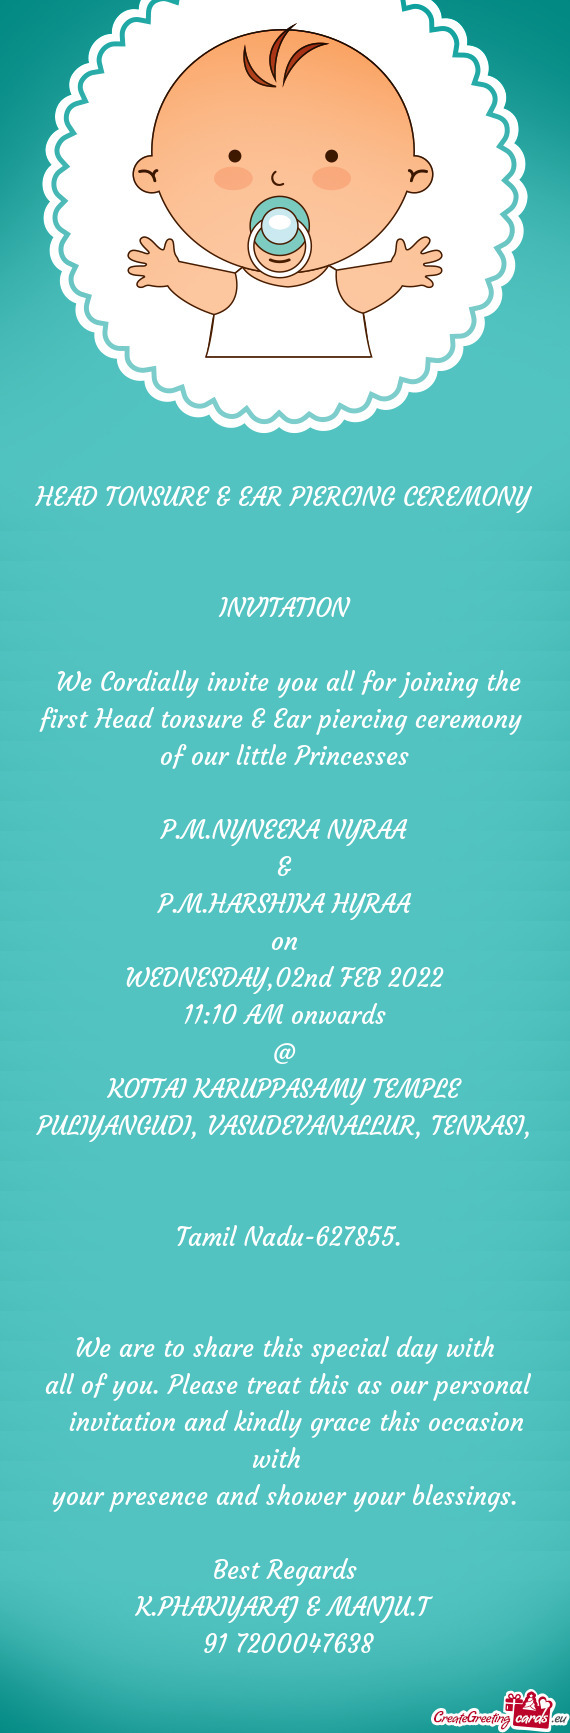 We Cordially invite you all for joining the first Head tonsure & Ear piercing ceremony